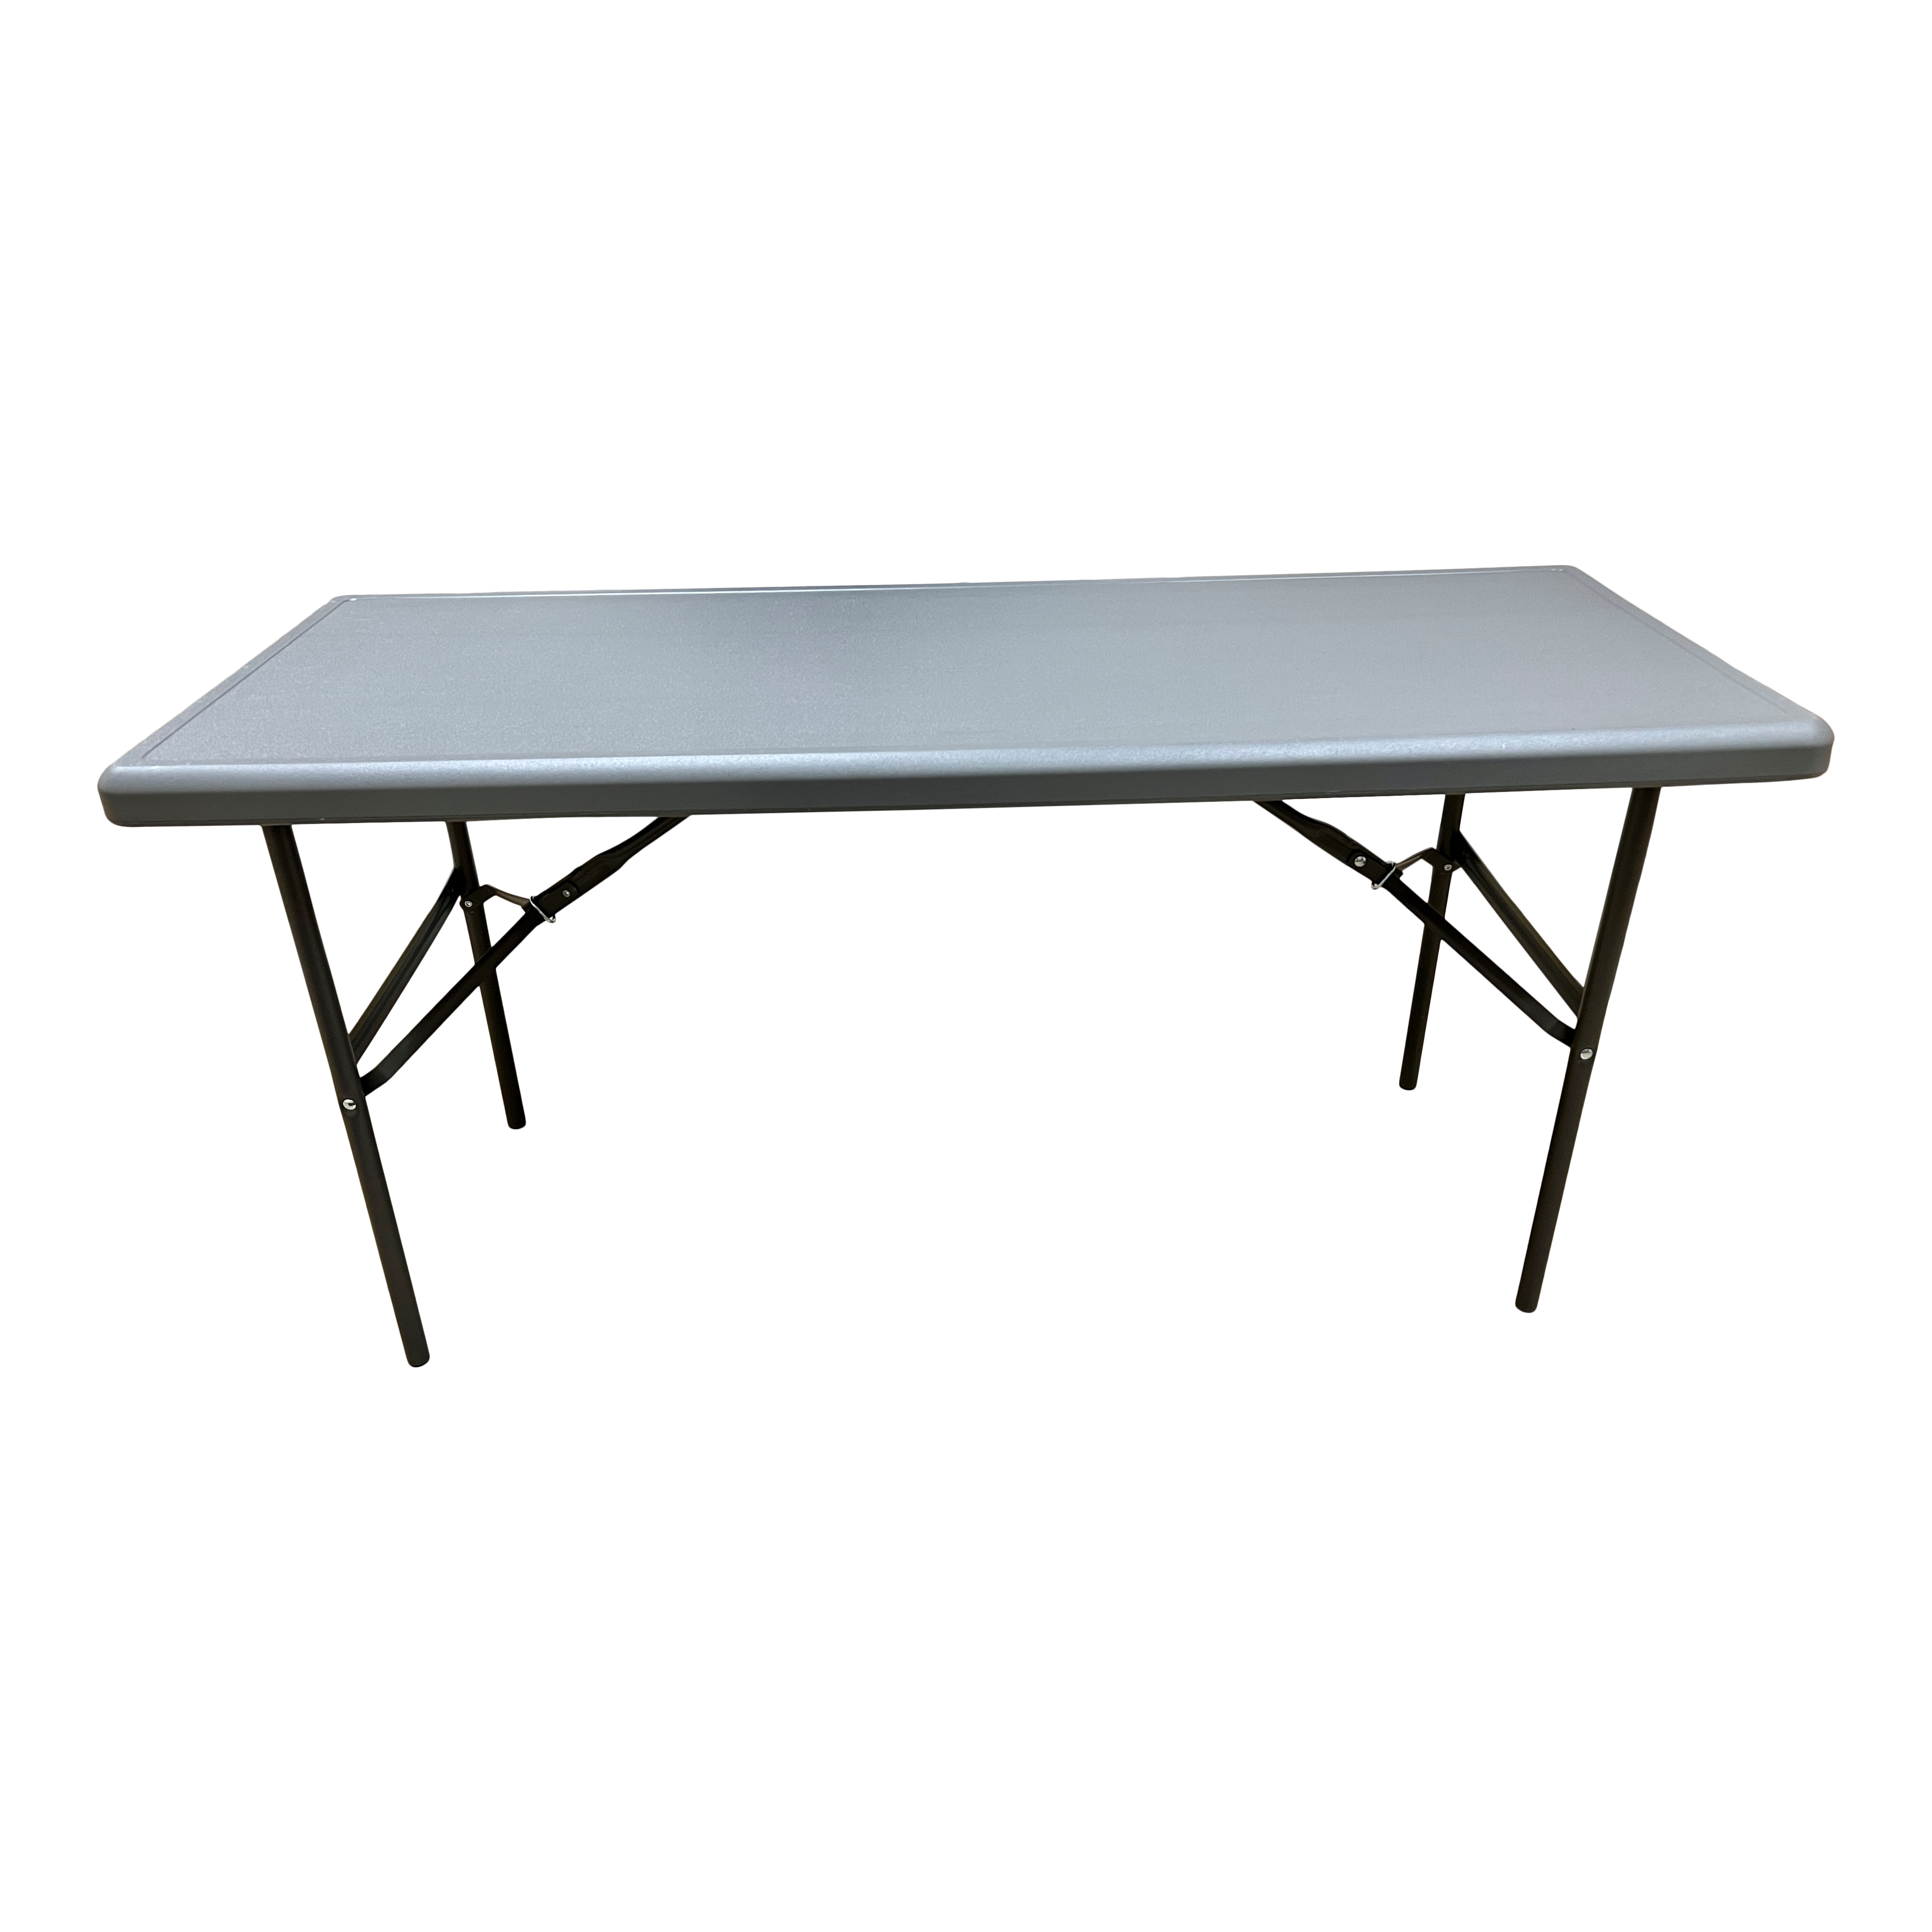 A charcoal five-foot folding table.